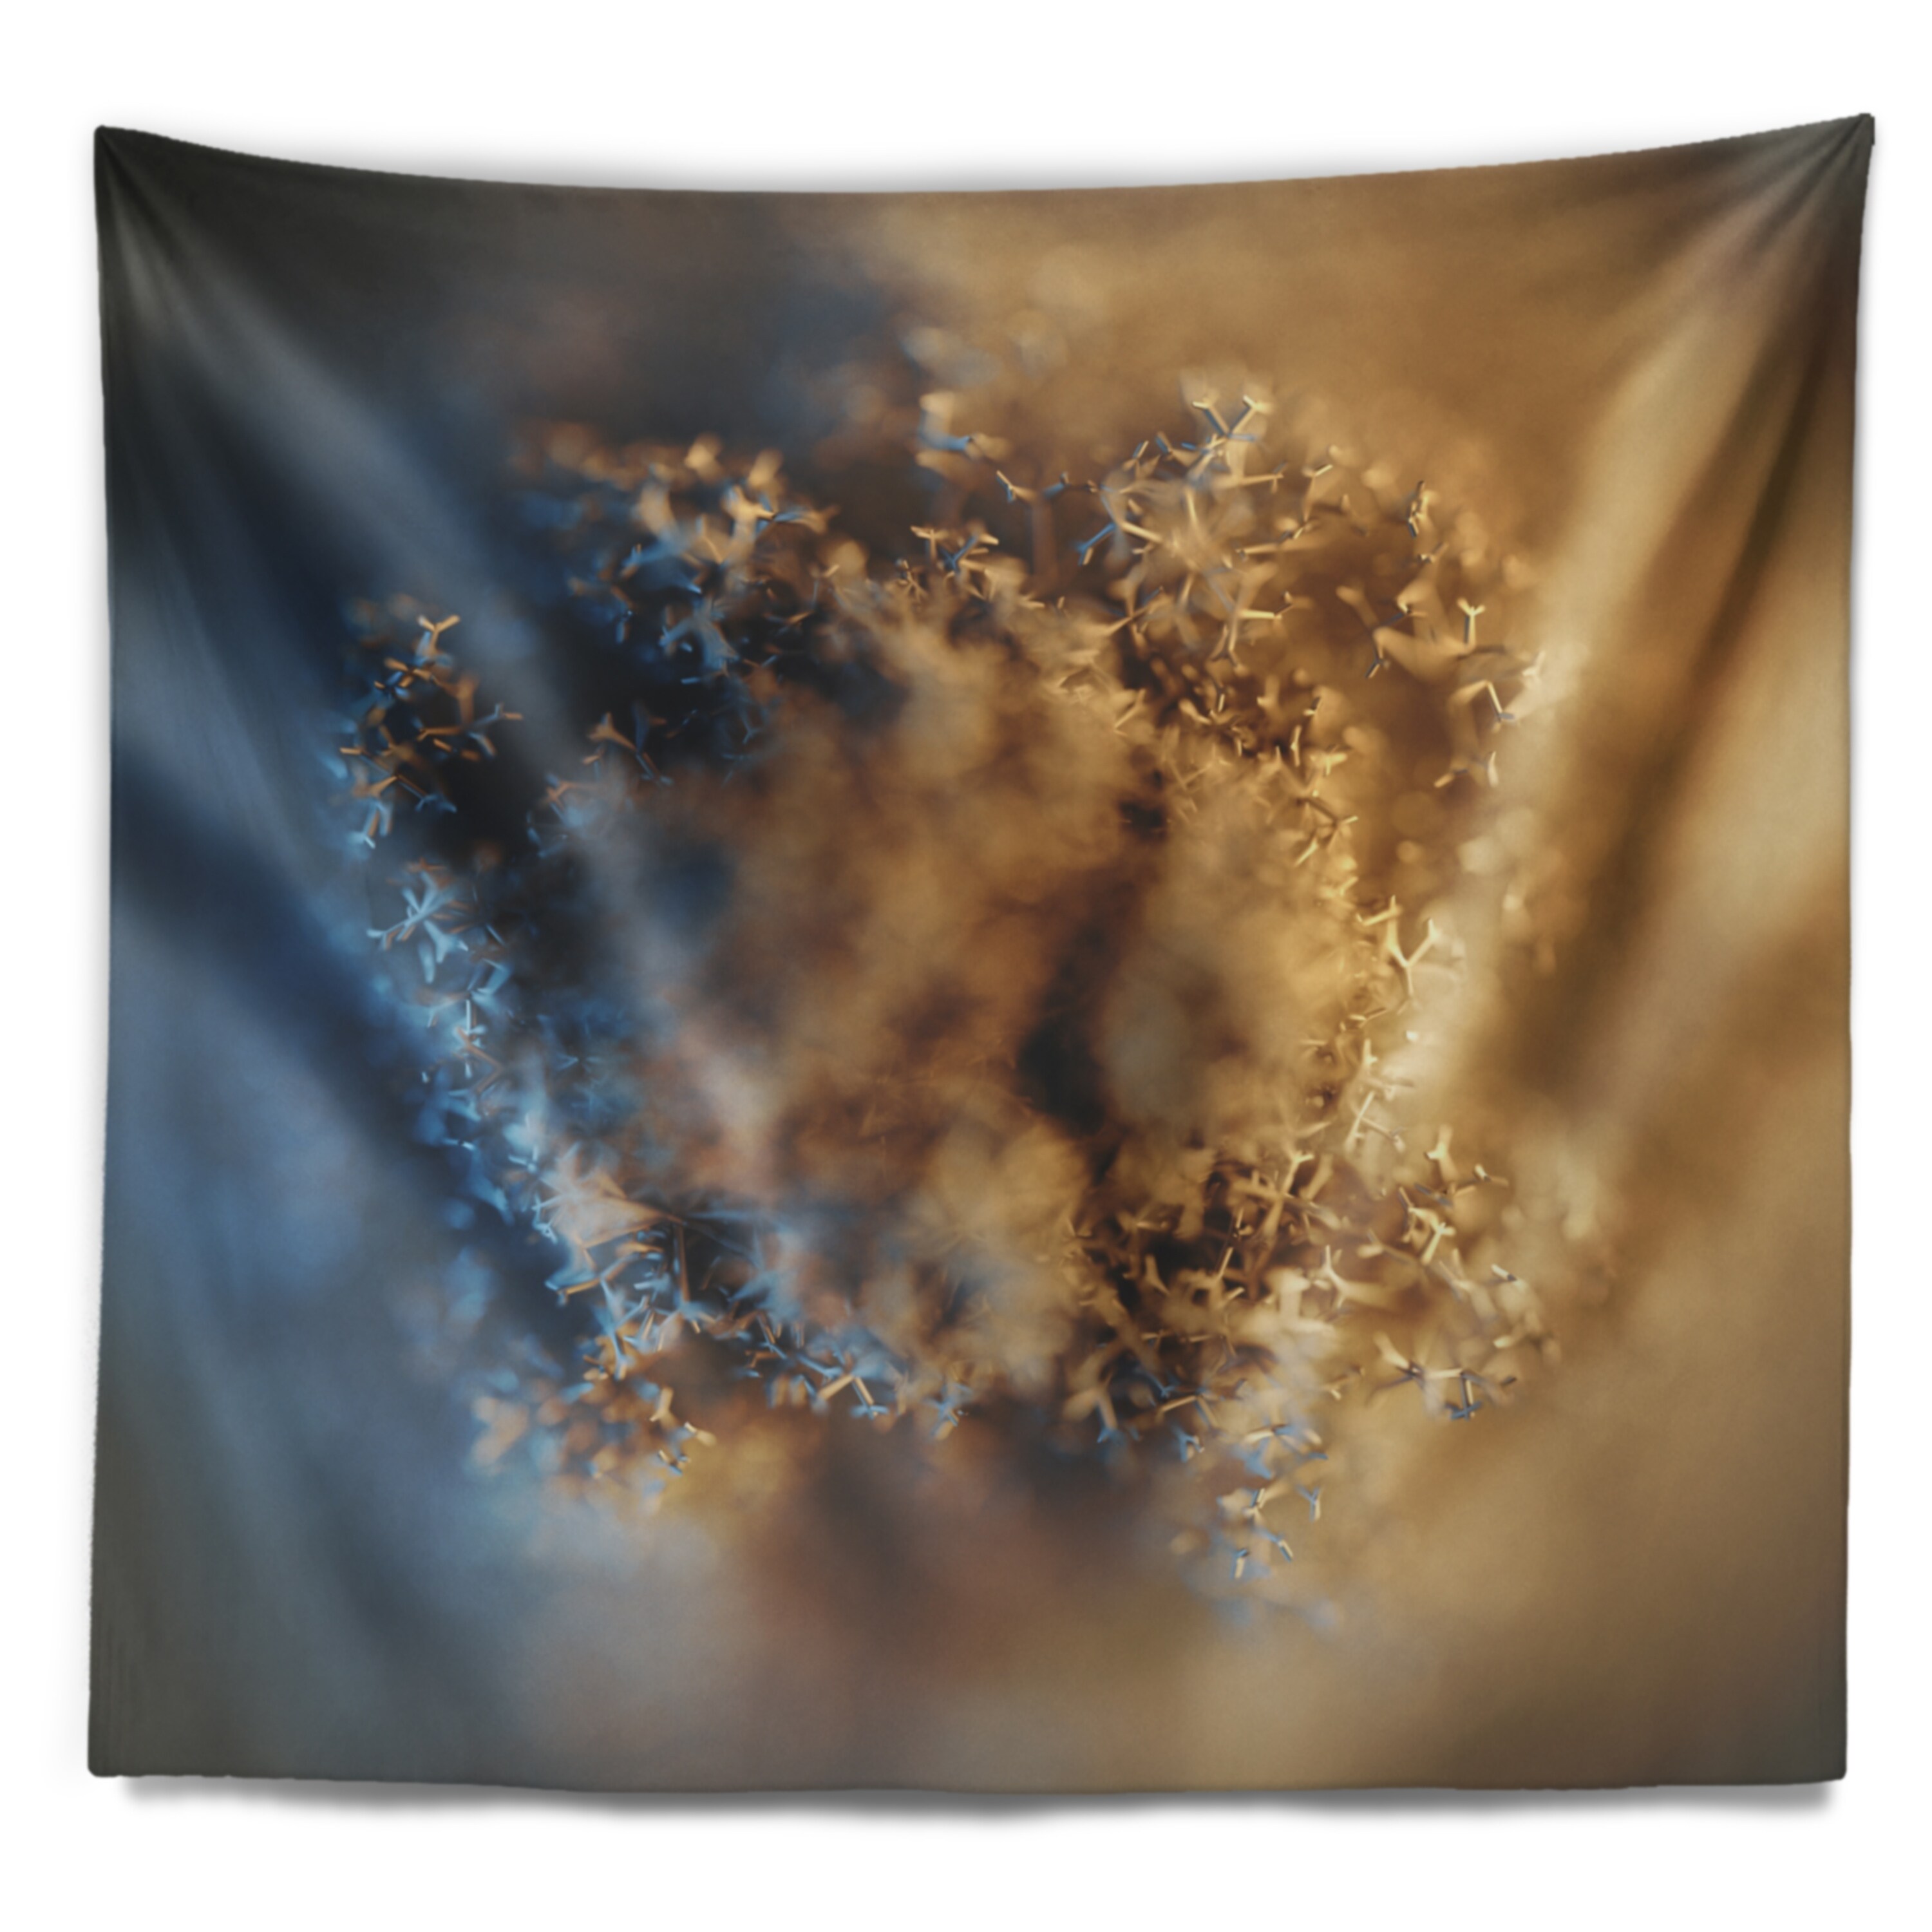 https://ak1.ostkcdn.com/images/products/20920036/Designart-Large-Macro-Prickly-Texture-Brown-Abstract-Wall-Tapestry-9b17ab0e-f8b0-4a32-824d-a86e65a04af6.jpg